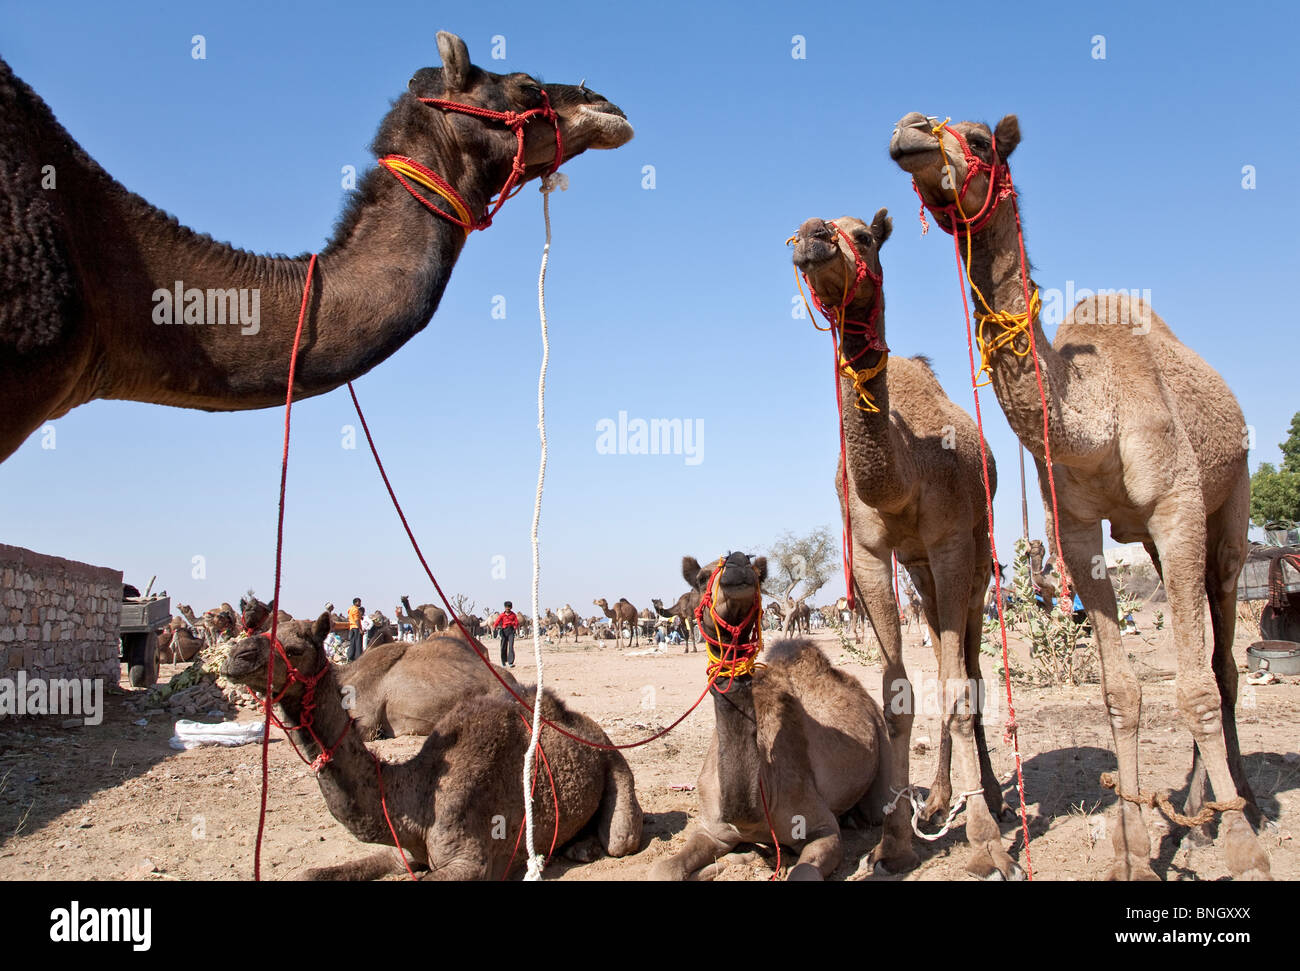 Camels for sale. Nagaur cattle fair. Rajasthan. India Stock Photo